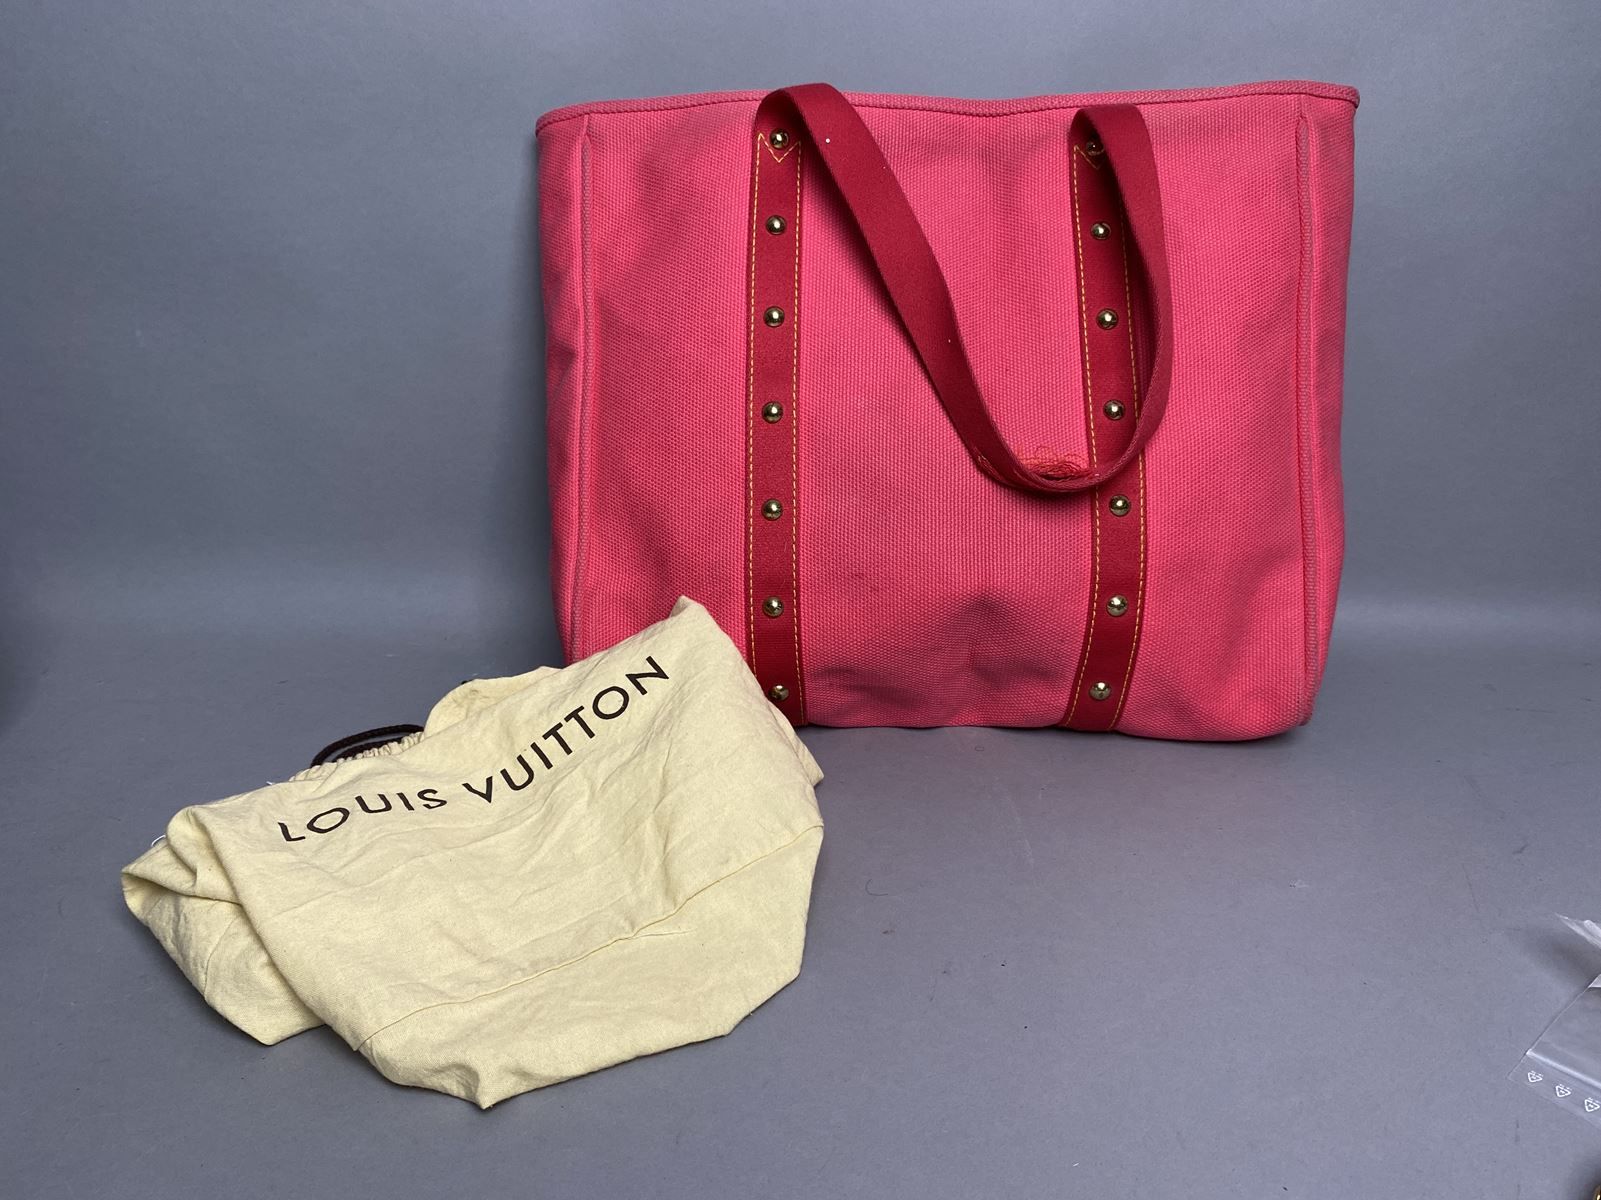 LOUIS VUITTON. Pink canvas tote bag, Antigua model, with…